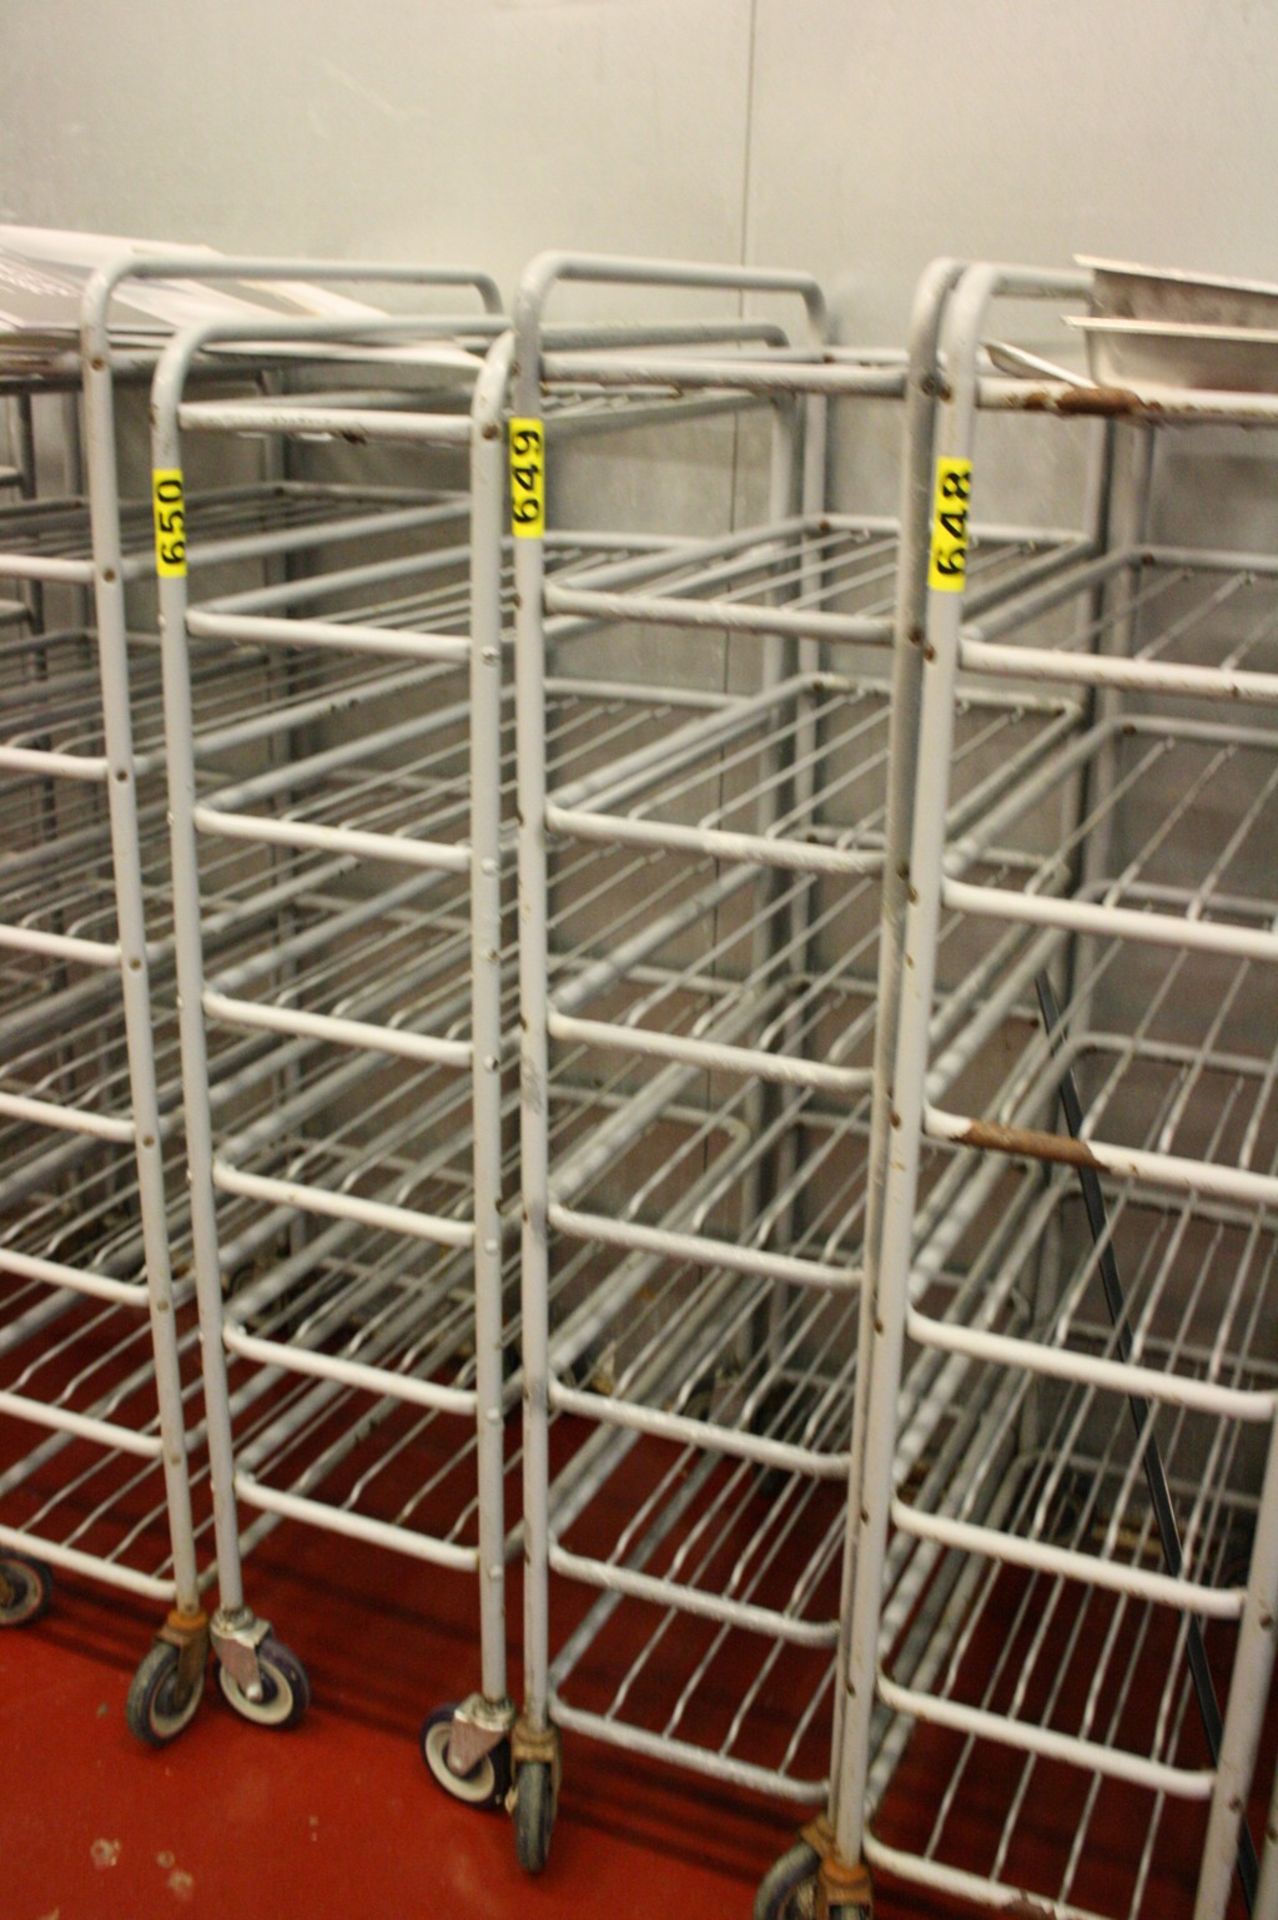 PORTABLE MEAT RACK-APPROX. 63" X 33" X 15"